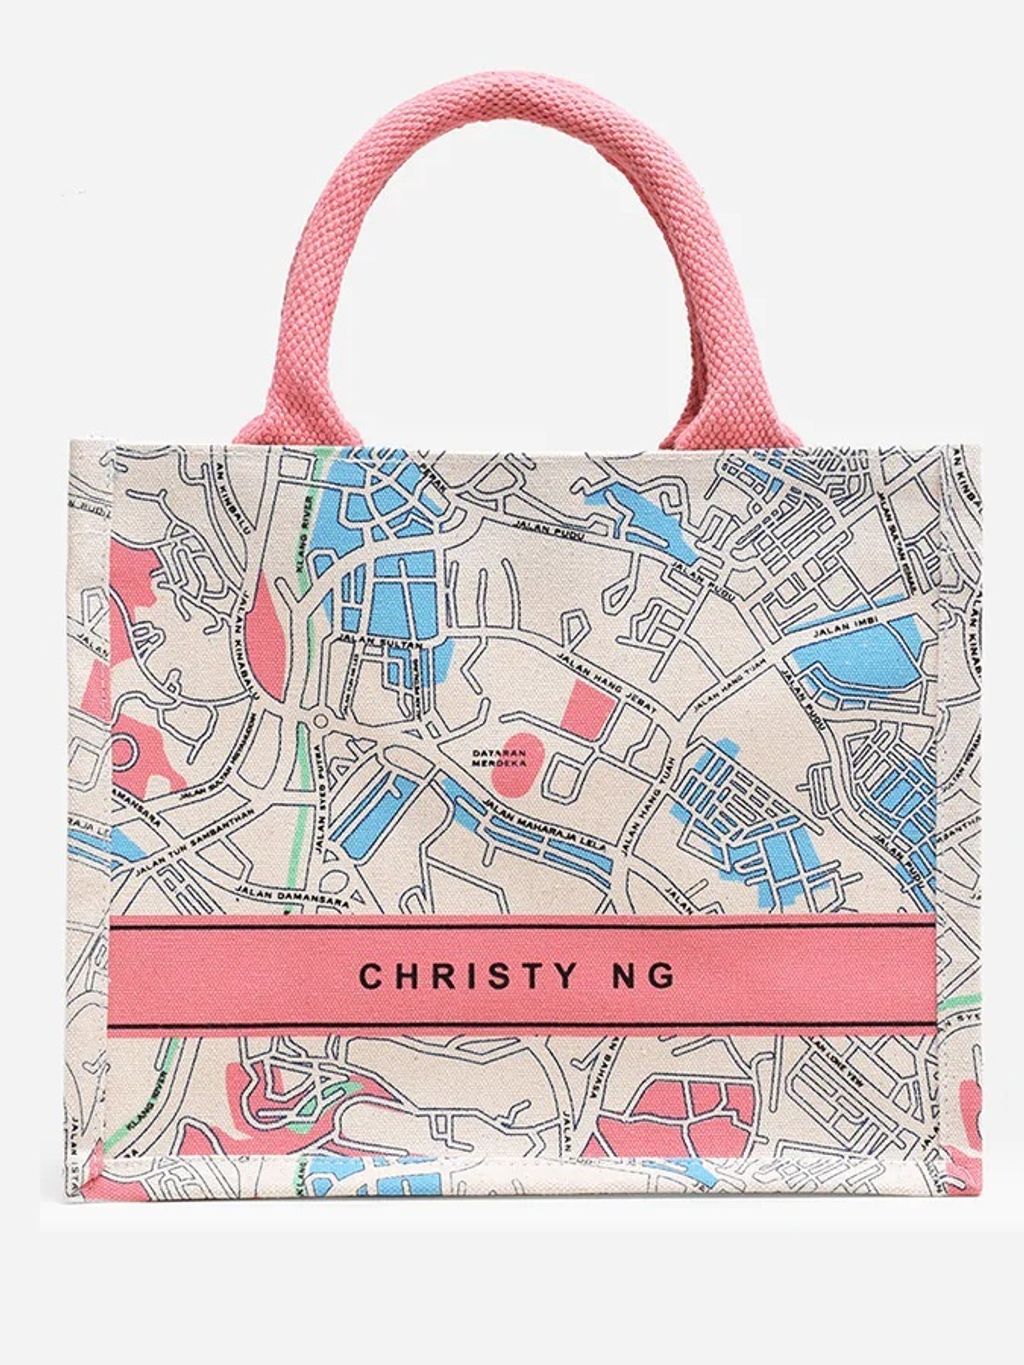 Winner Announcement for AEON Credit x Christy Ng Limited Edition Tote Bag